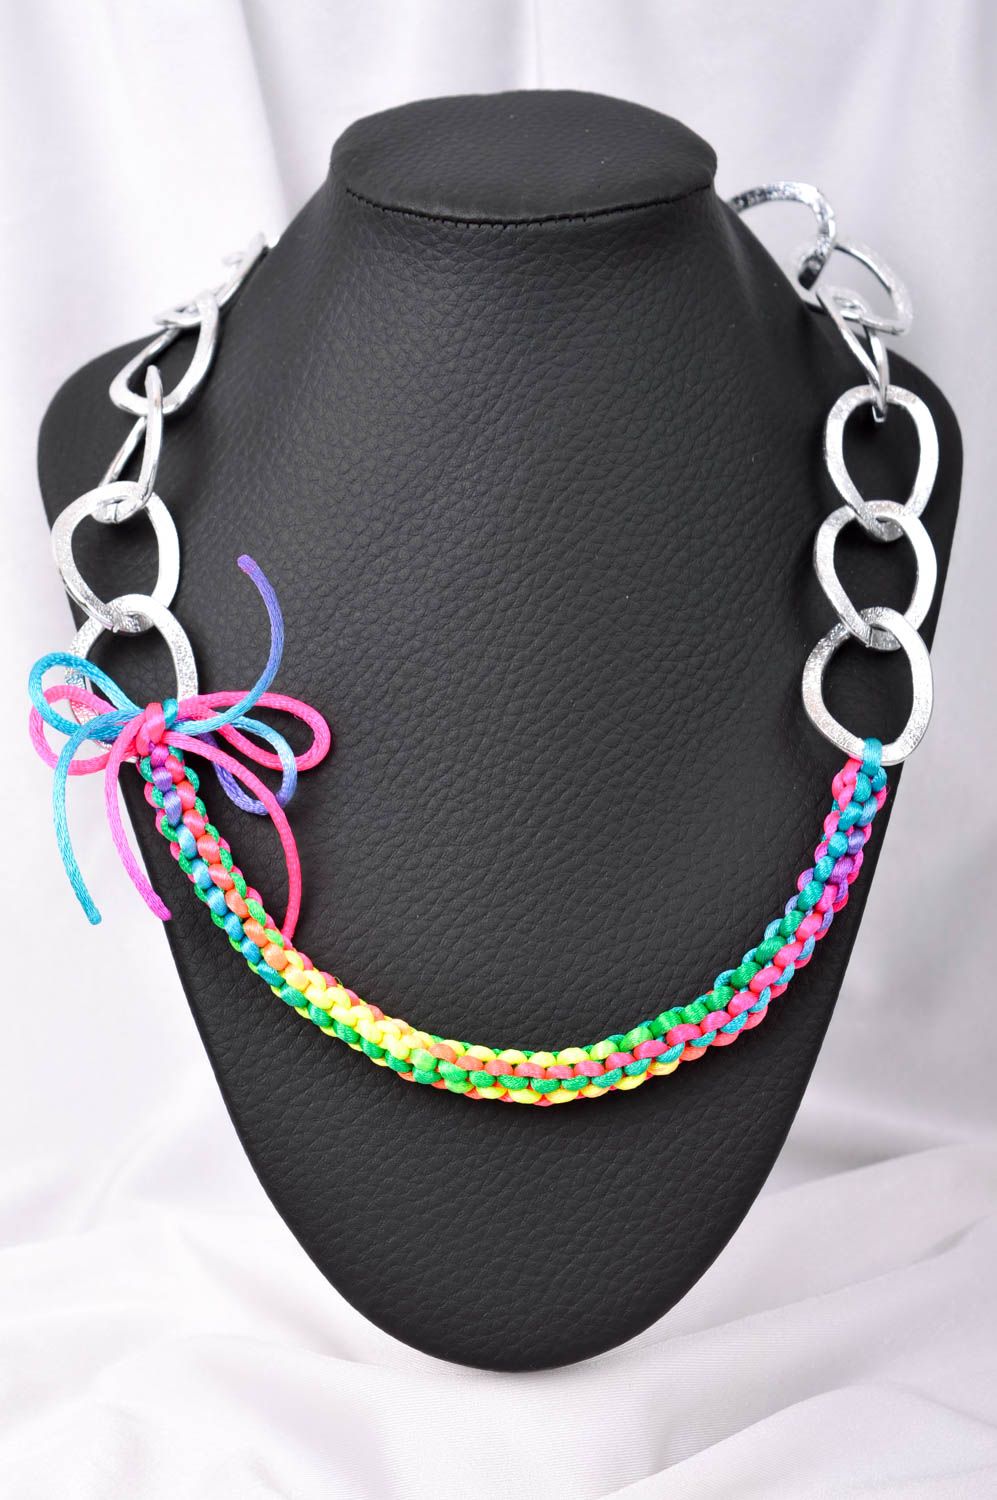 Designer handmade necklace lovely cute accessories unusual beautiful jewelry photo 1